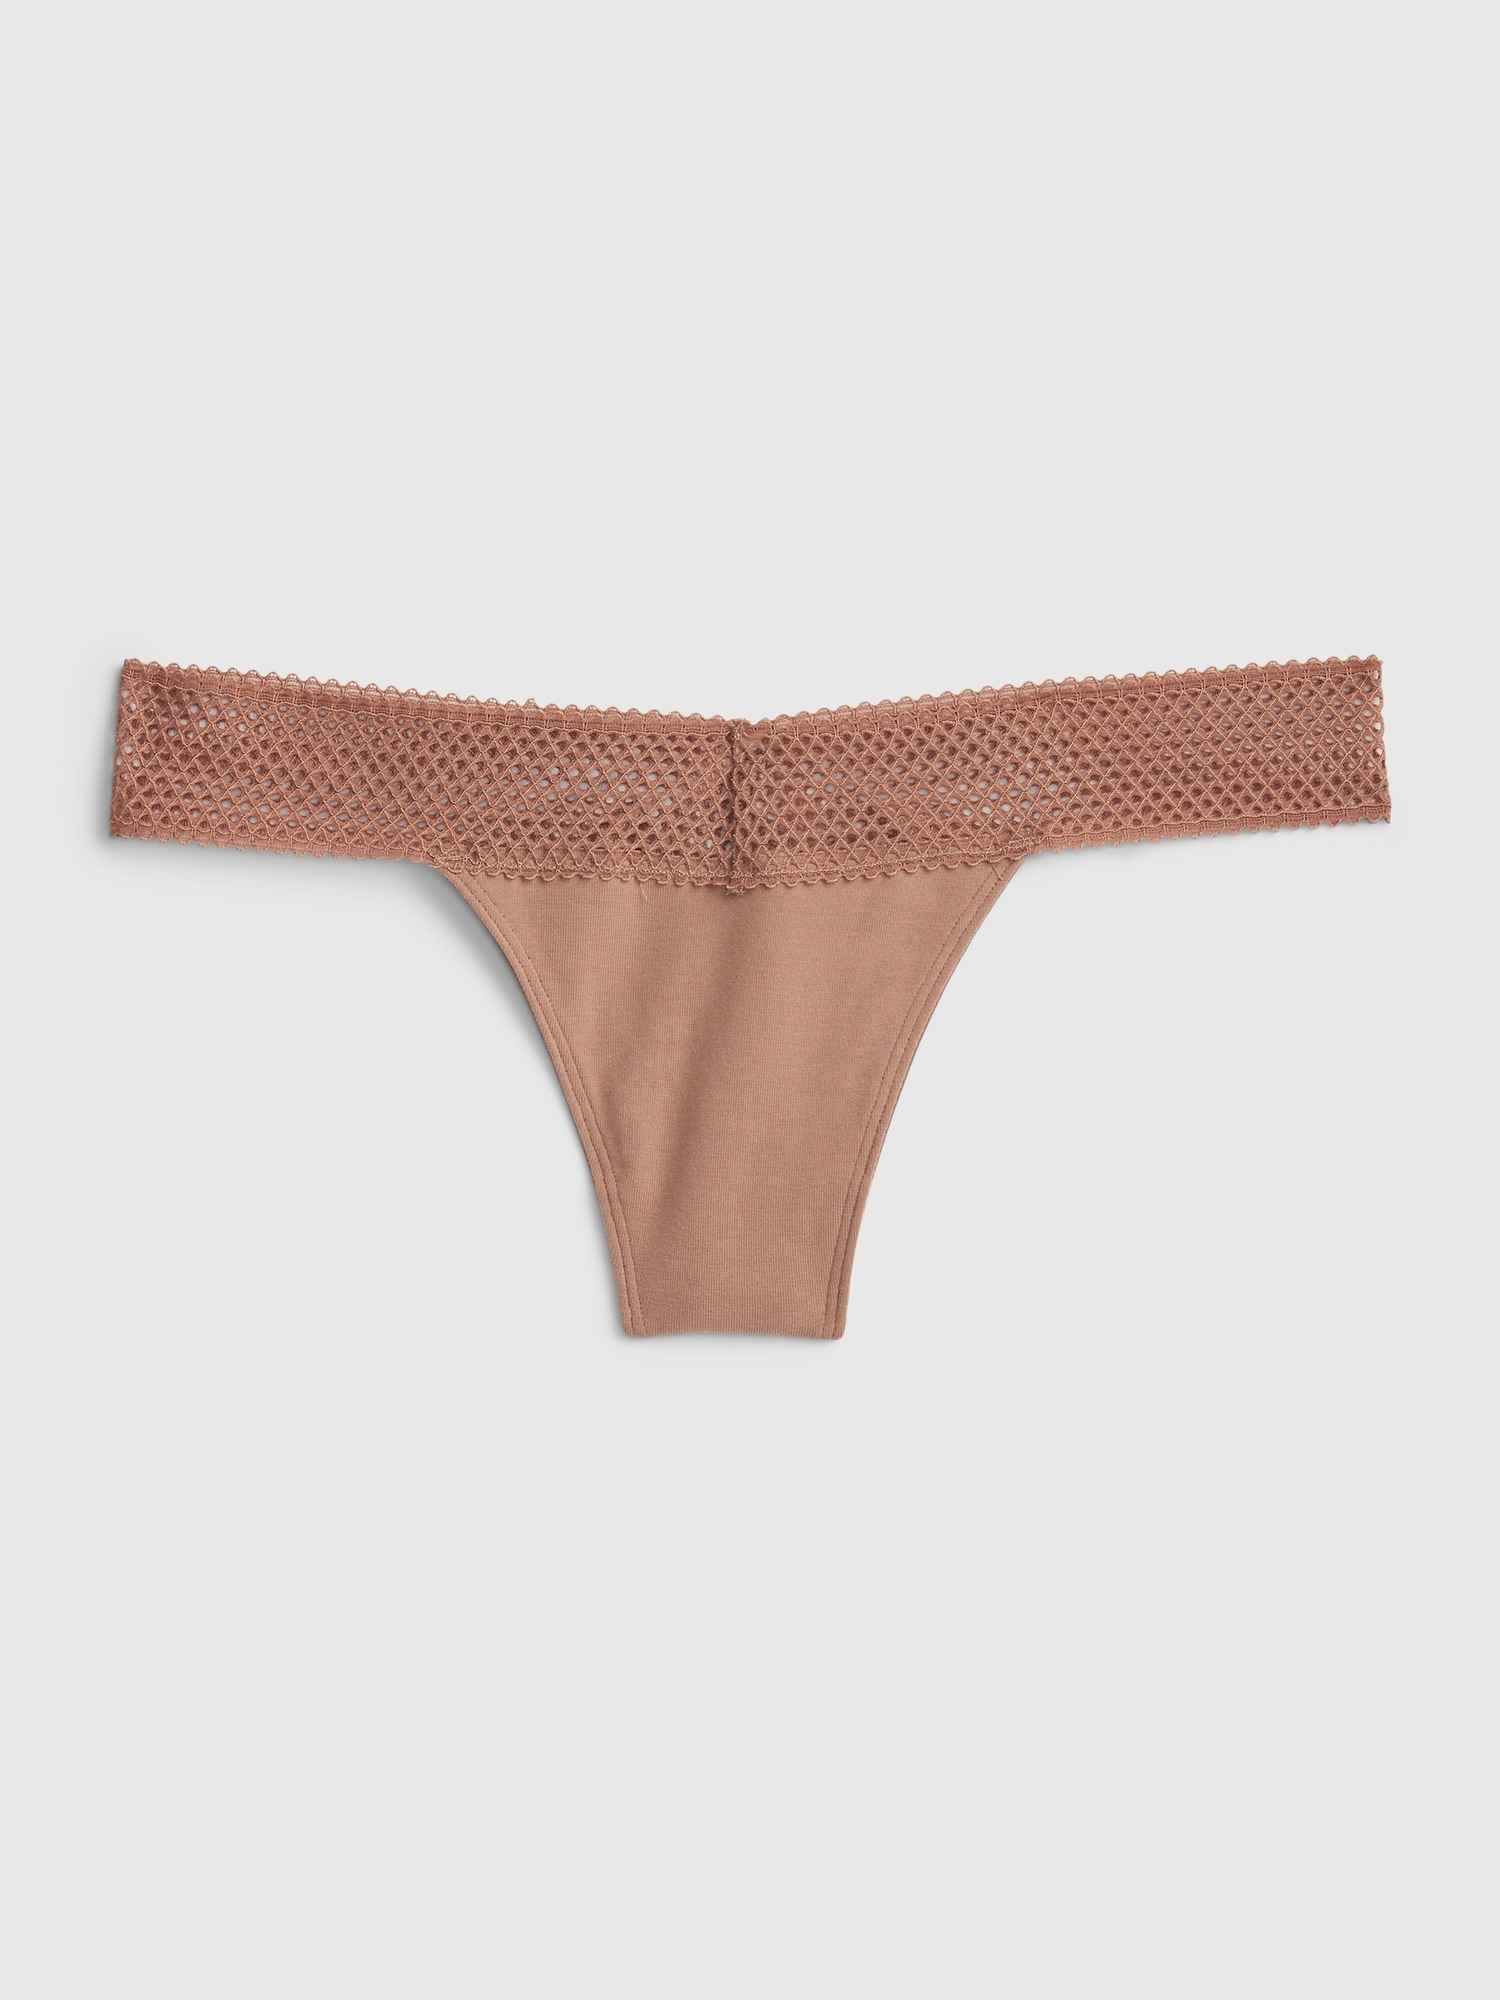 Gap Women's Stretch Cotton Lace Thong (Clay Brown)